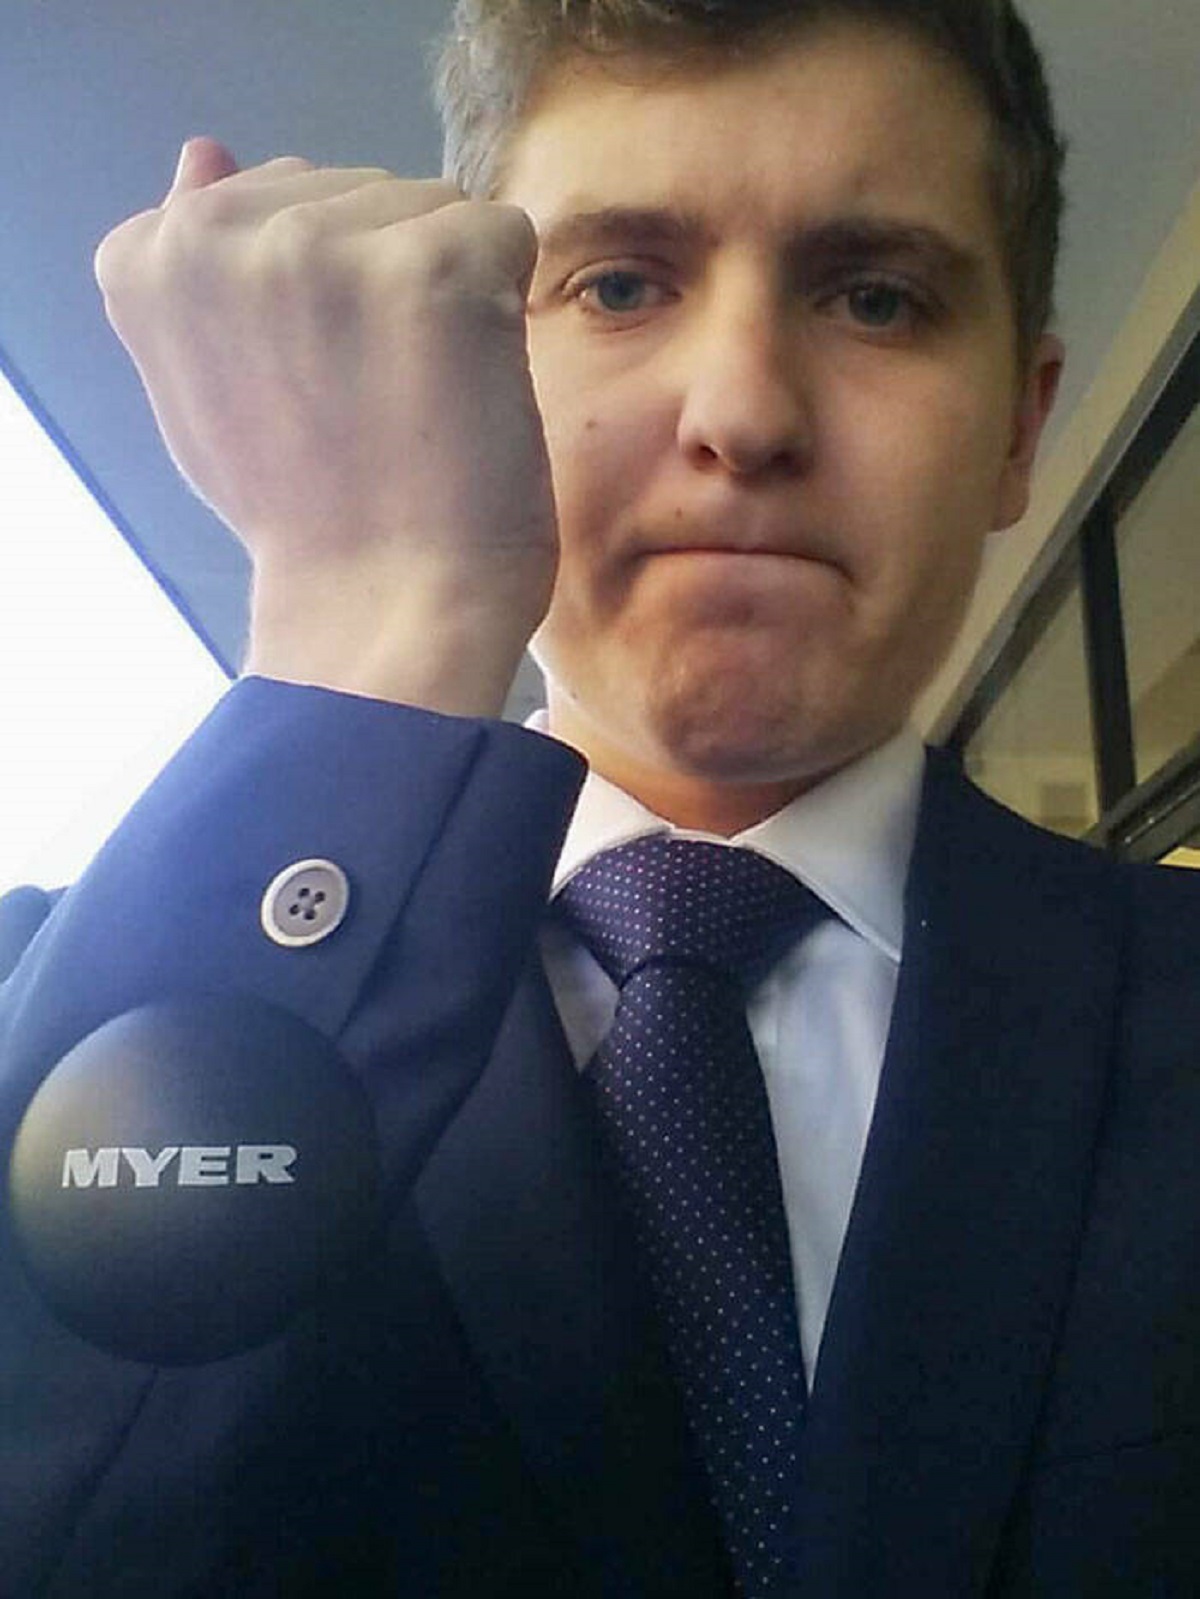 "About To Arrive For An Interview In A New Suit, I Realized I Left The Tag On"